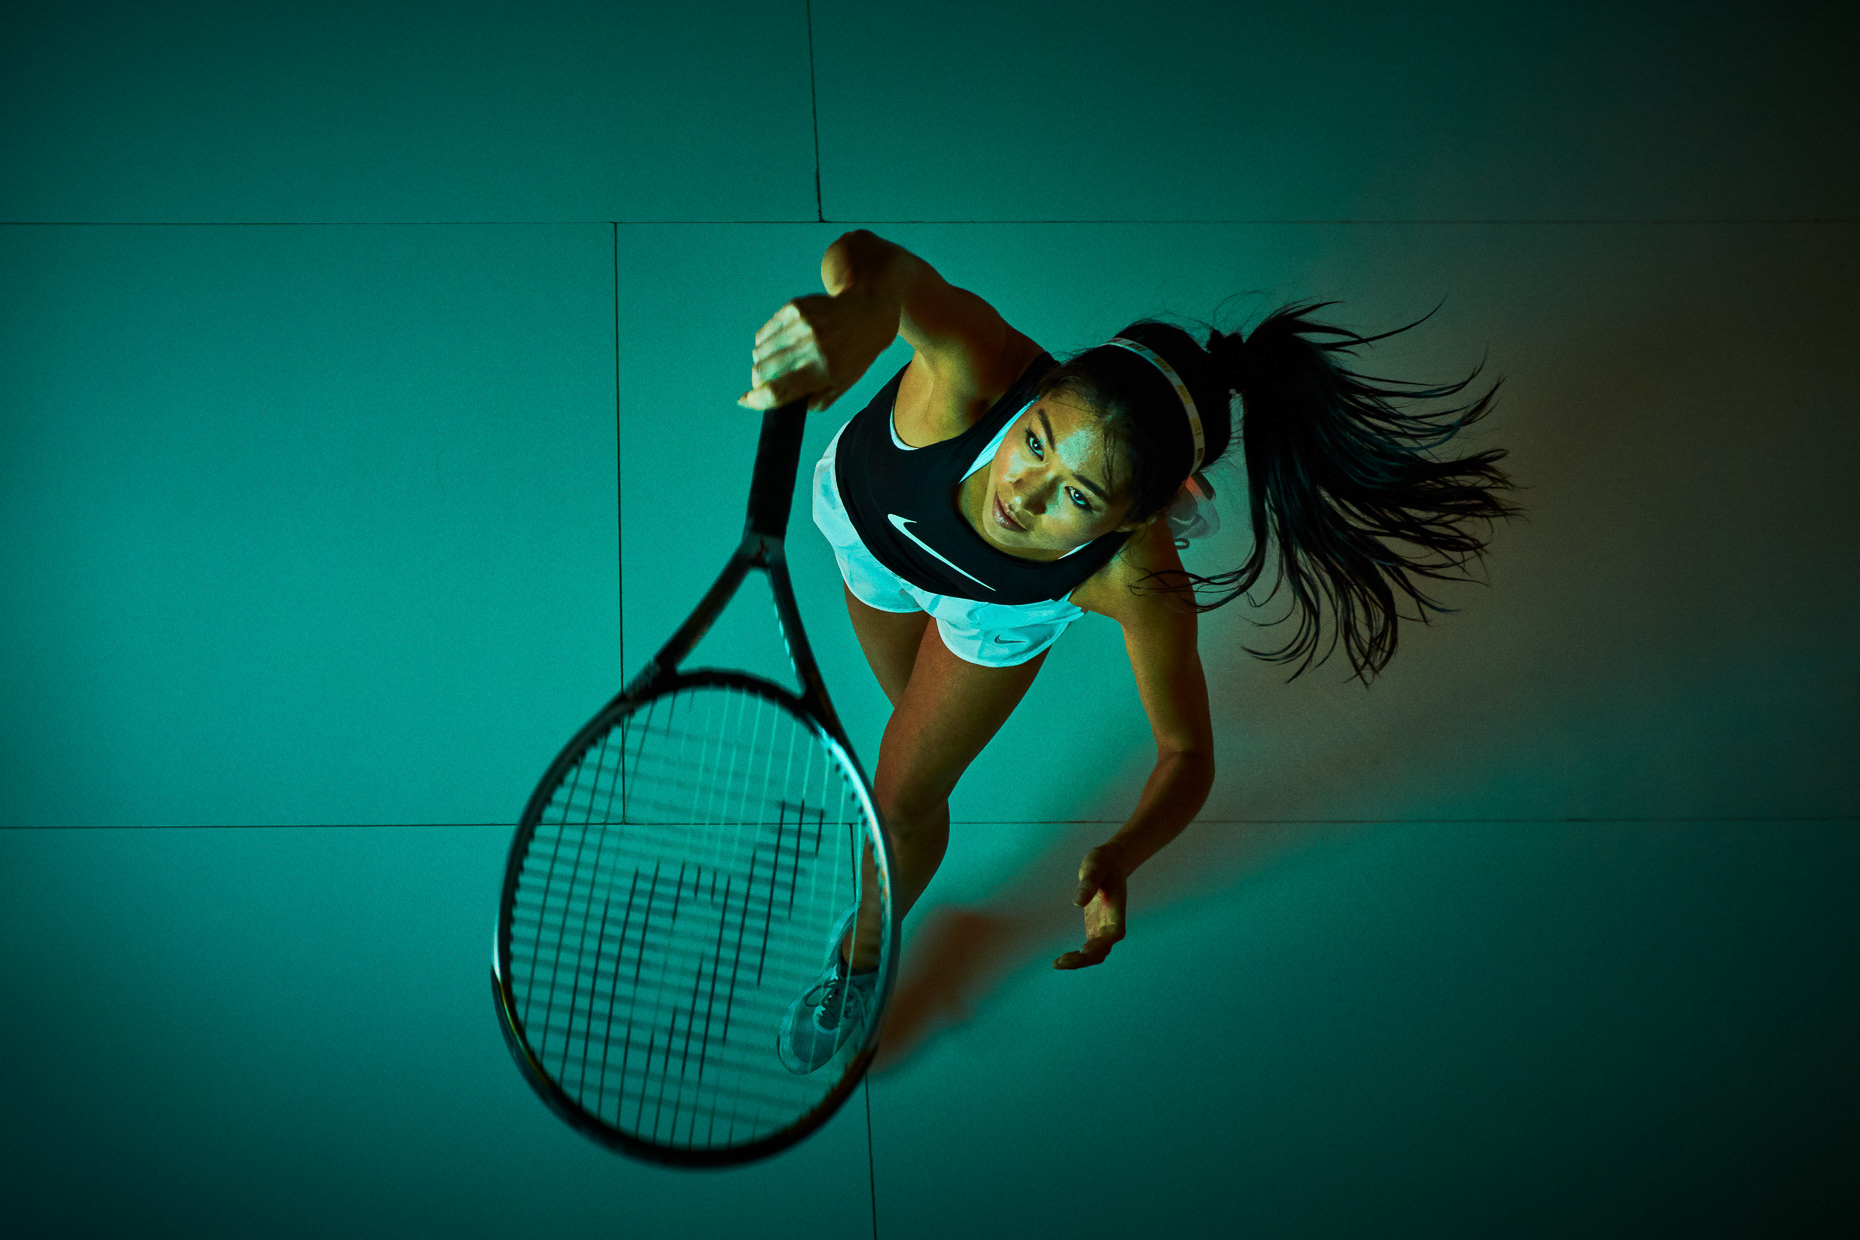 Nike Tennis serve Jenny Meeker shot from above with colorful blue gels by Andy Batt 